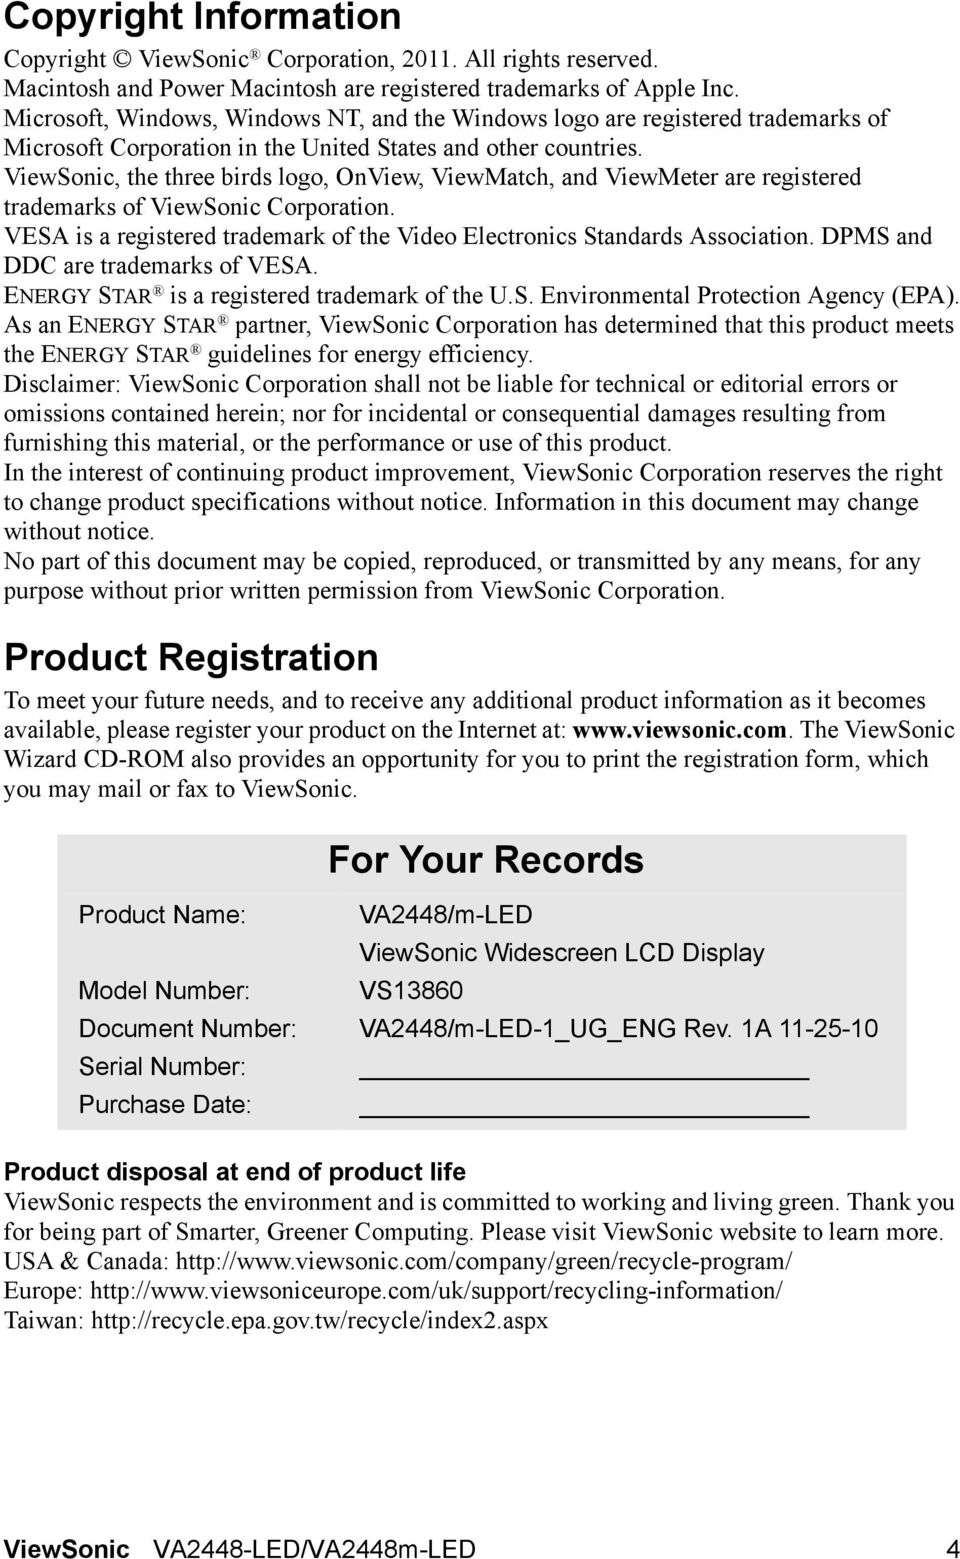 ViewSonic, the three birds logo, OnView, ViewMatch, and ViewMeter are registered trademarks of ViewSonic Corporation. VESA is a registered trademark of the Video Electronics Standards Association.